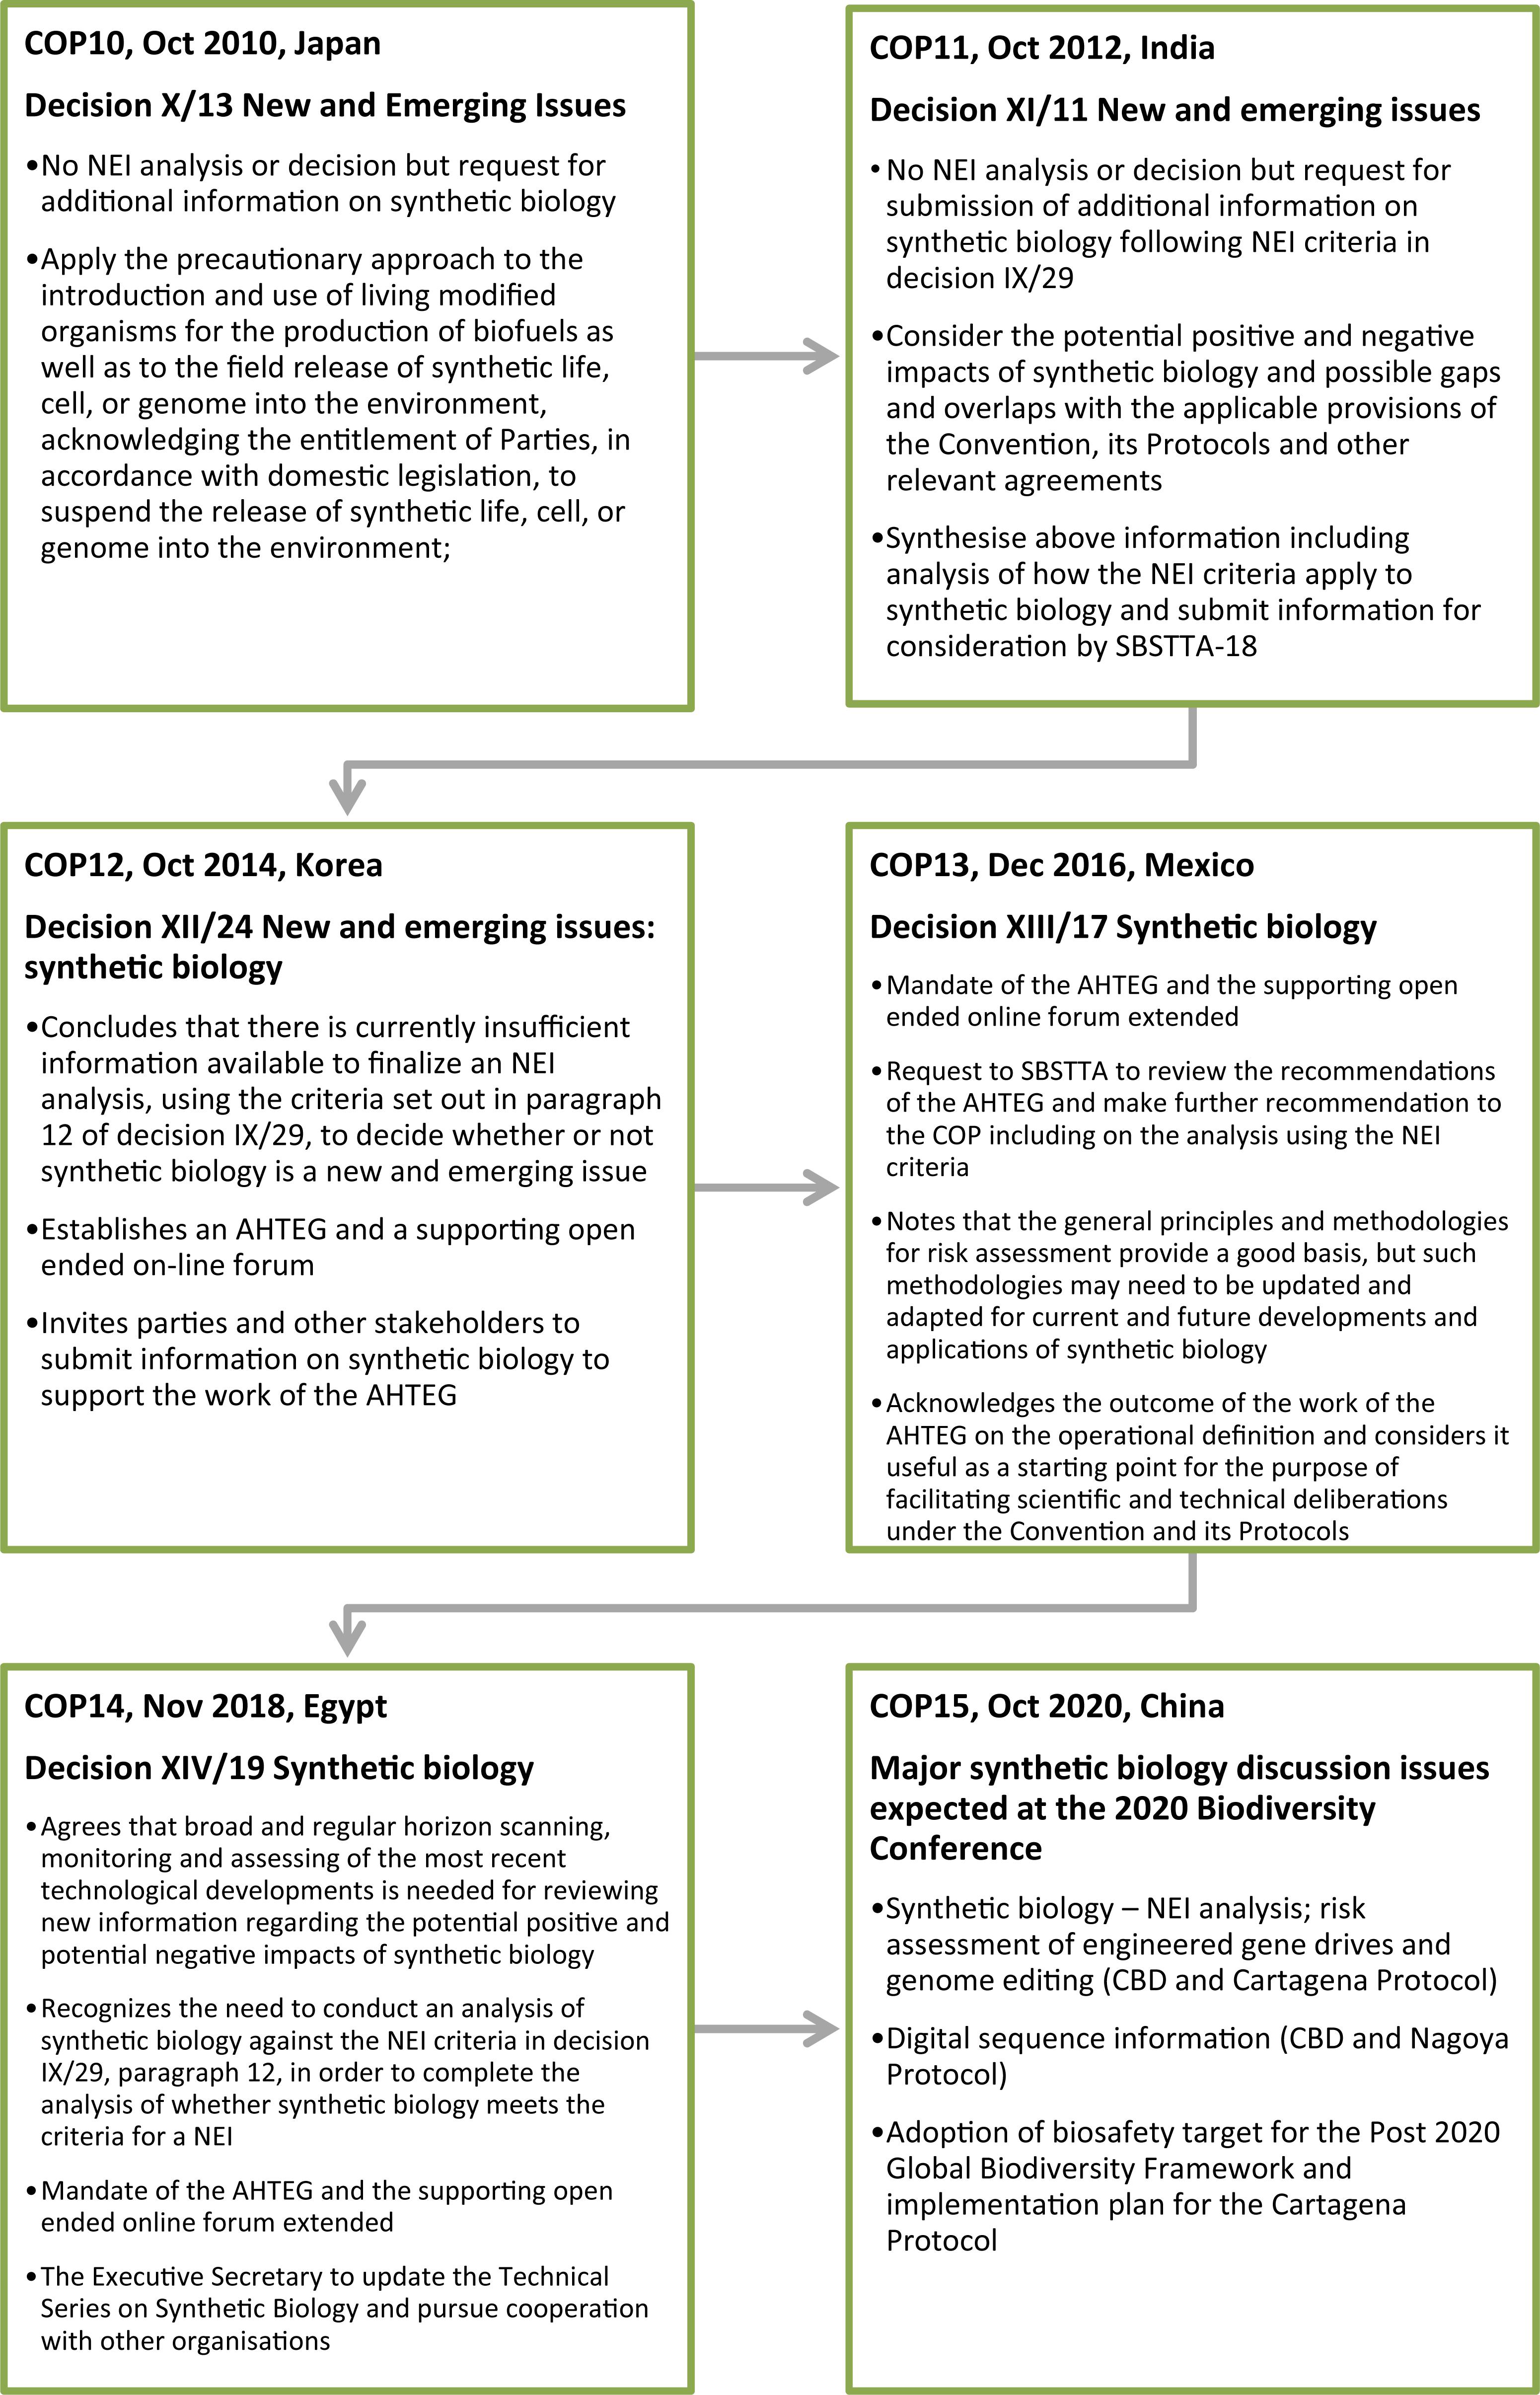 Frontiers | Regulation of Synthetic Biology: Developments Under the  Convention on Biological Diversity and Its Protocols